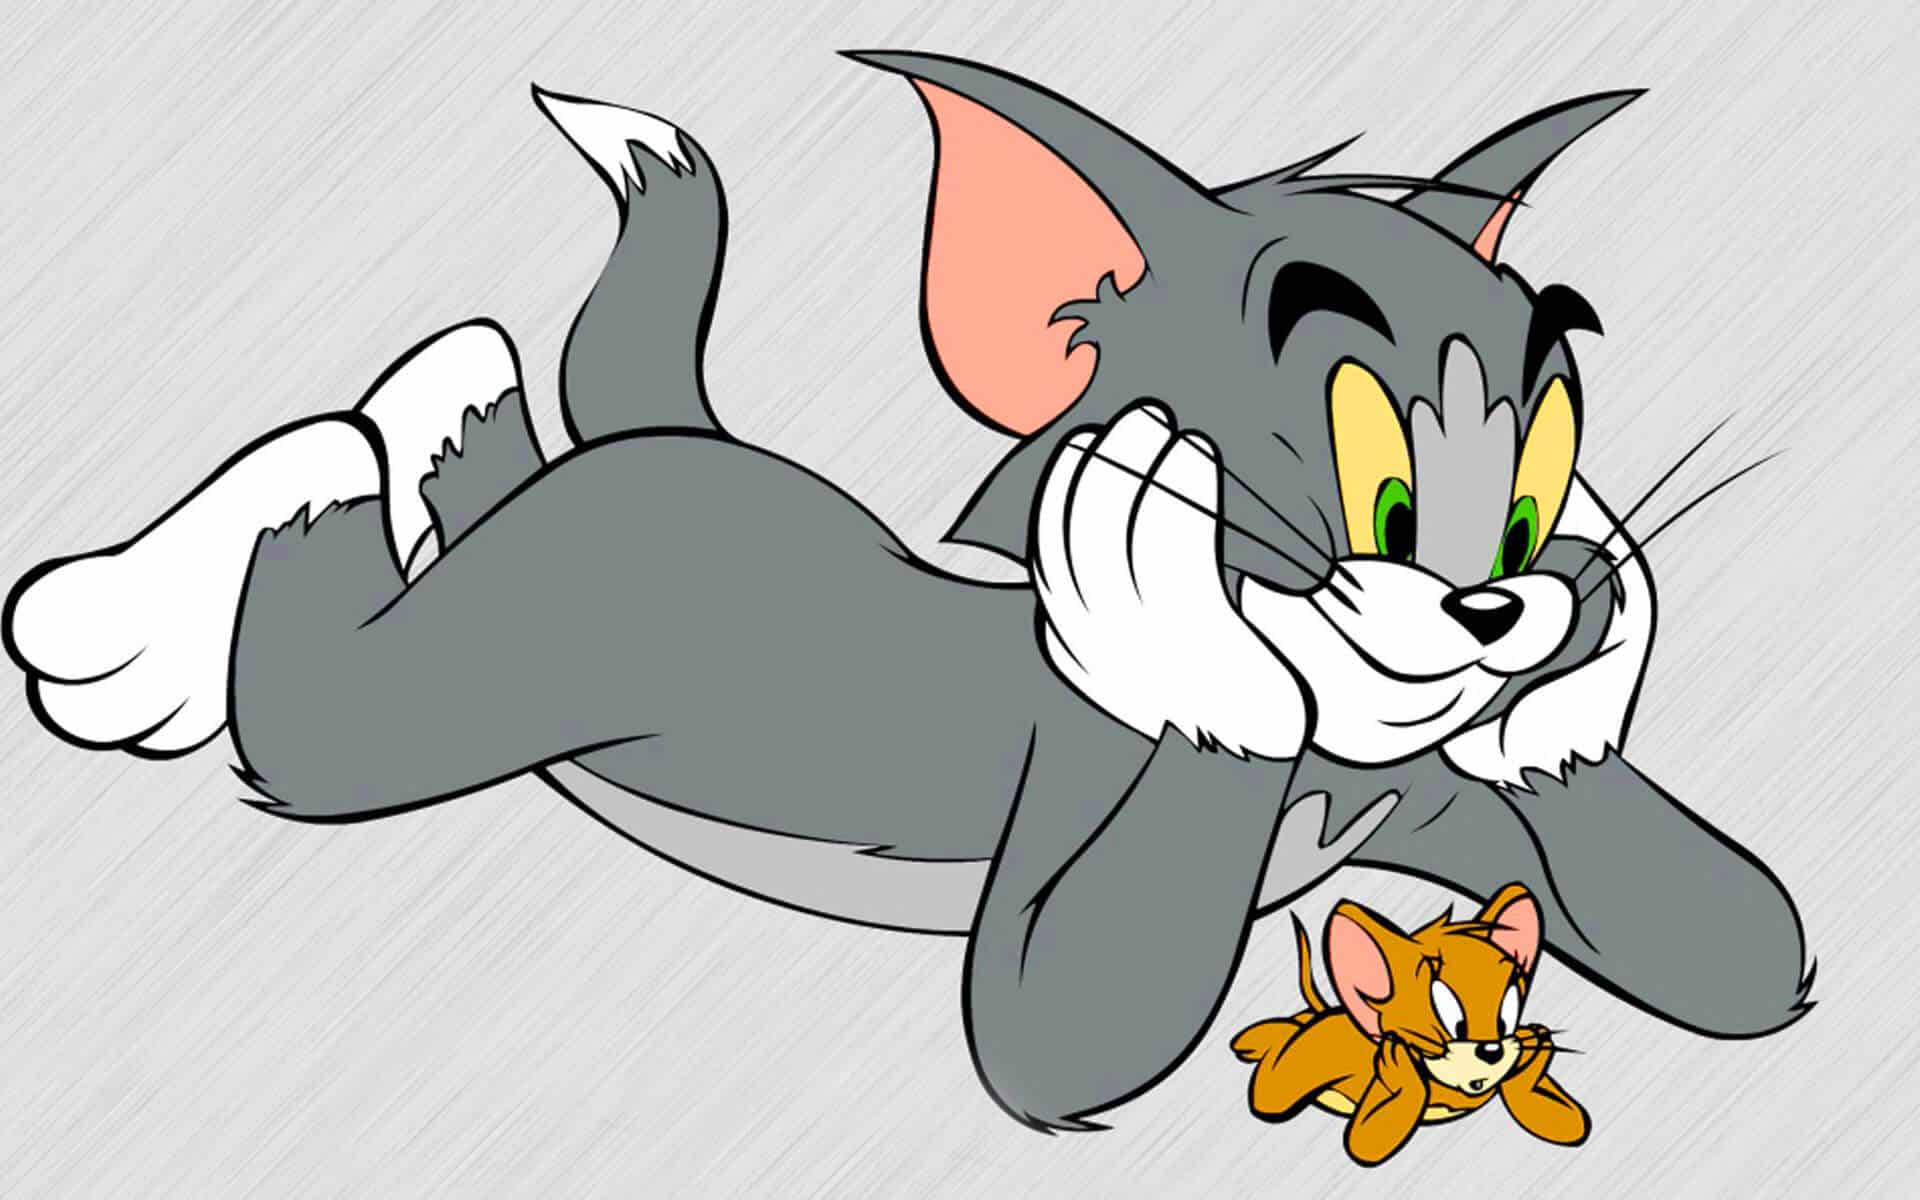 Tom and Jerry DP Photo